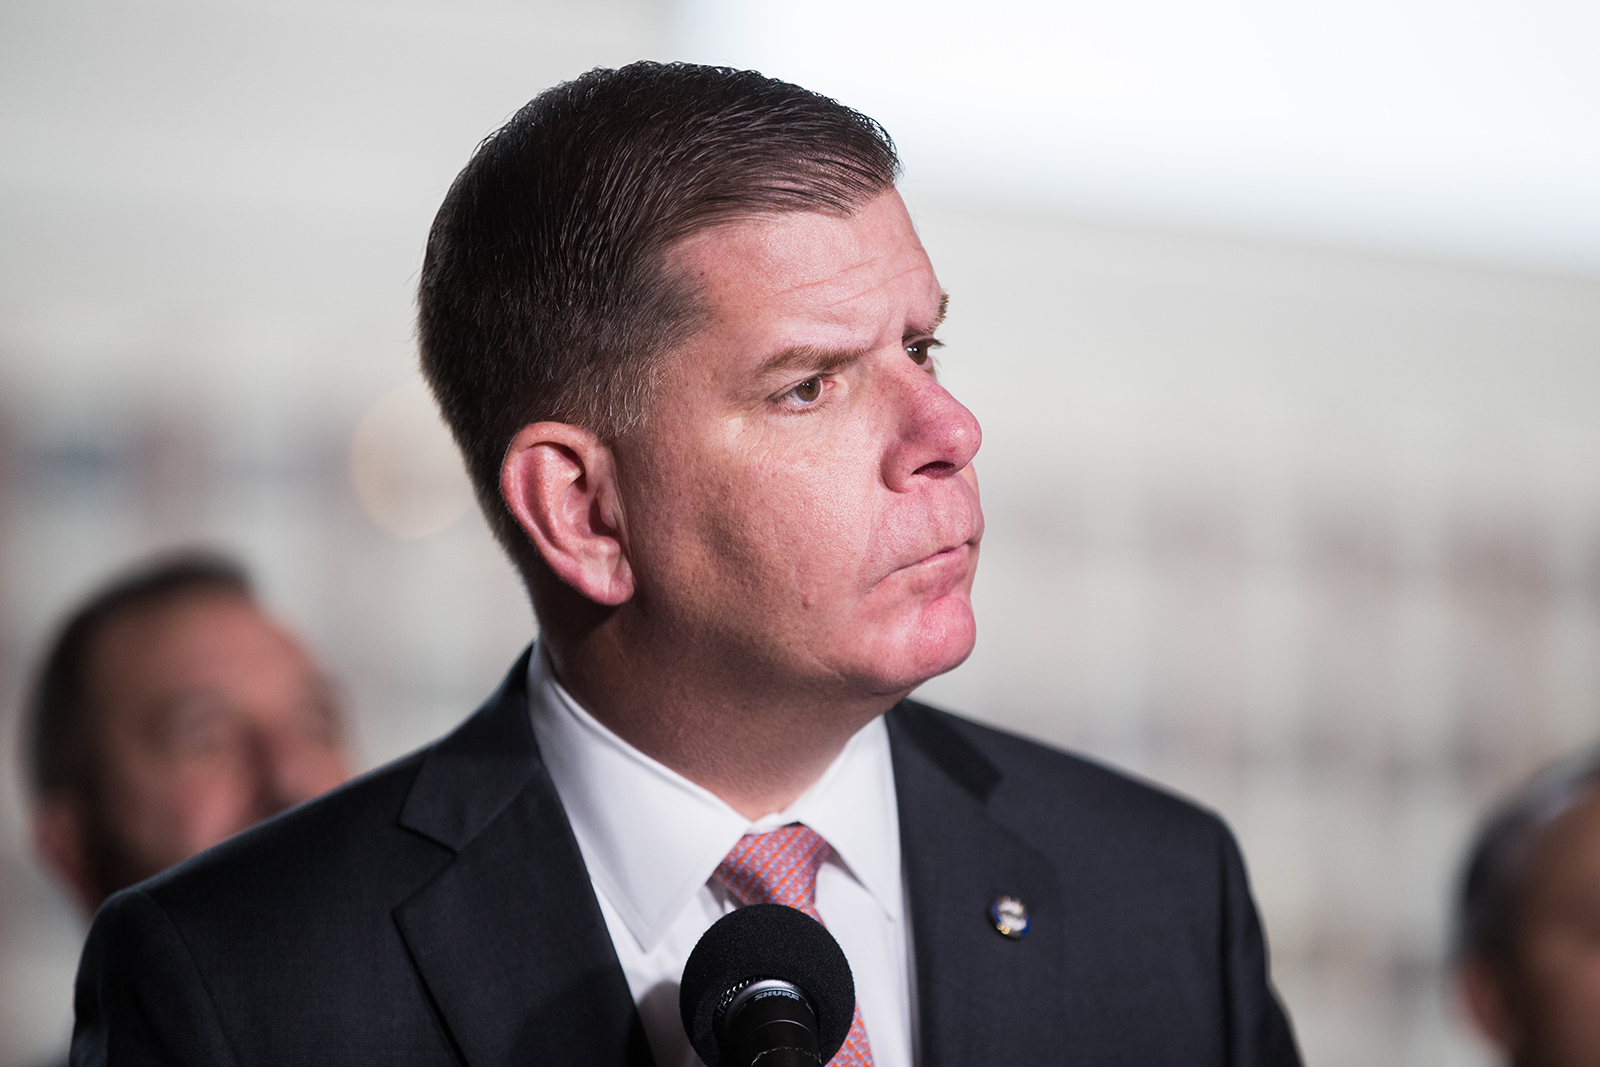 Boston Mayor Marty Walsh listens to a question at a press conference on March 13, in Boston, Massachusetts.